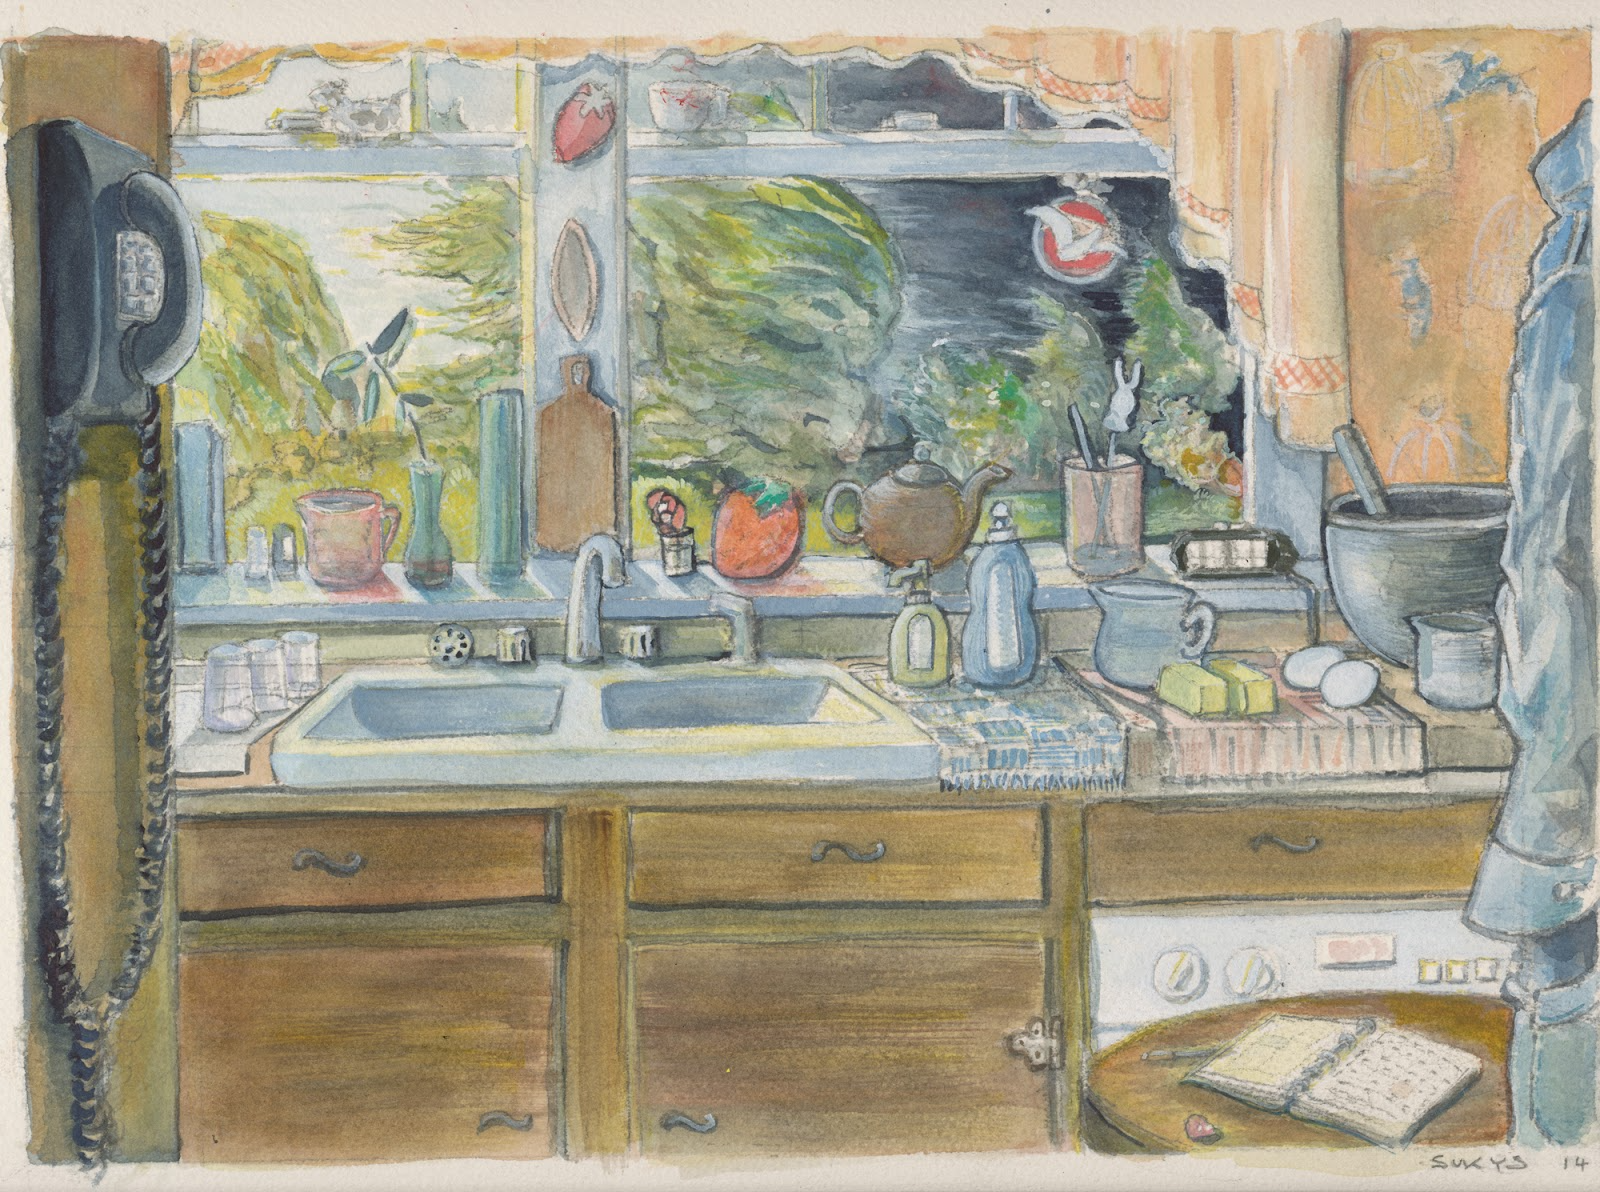 A watercolor painting of a kitchen counter with wood cabinets, a sink, and ingredients for cake set out to come to room temperature. The window over the sink looks out into a turbulent, dark sky and strong winds bending the trees almost in half.